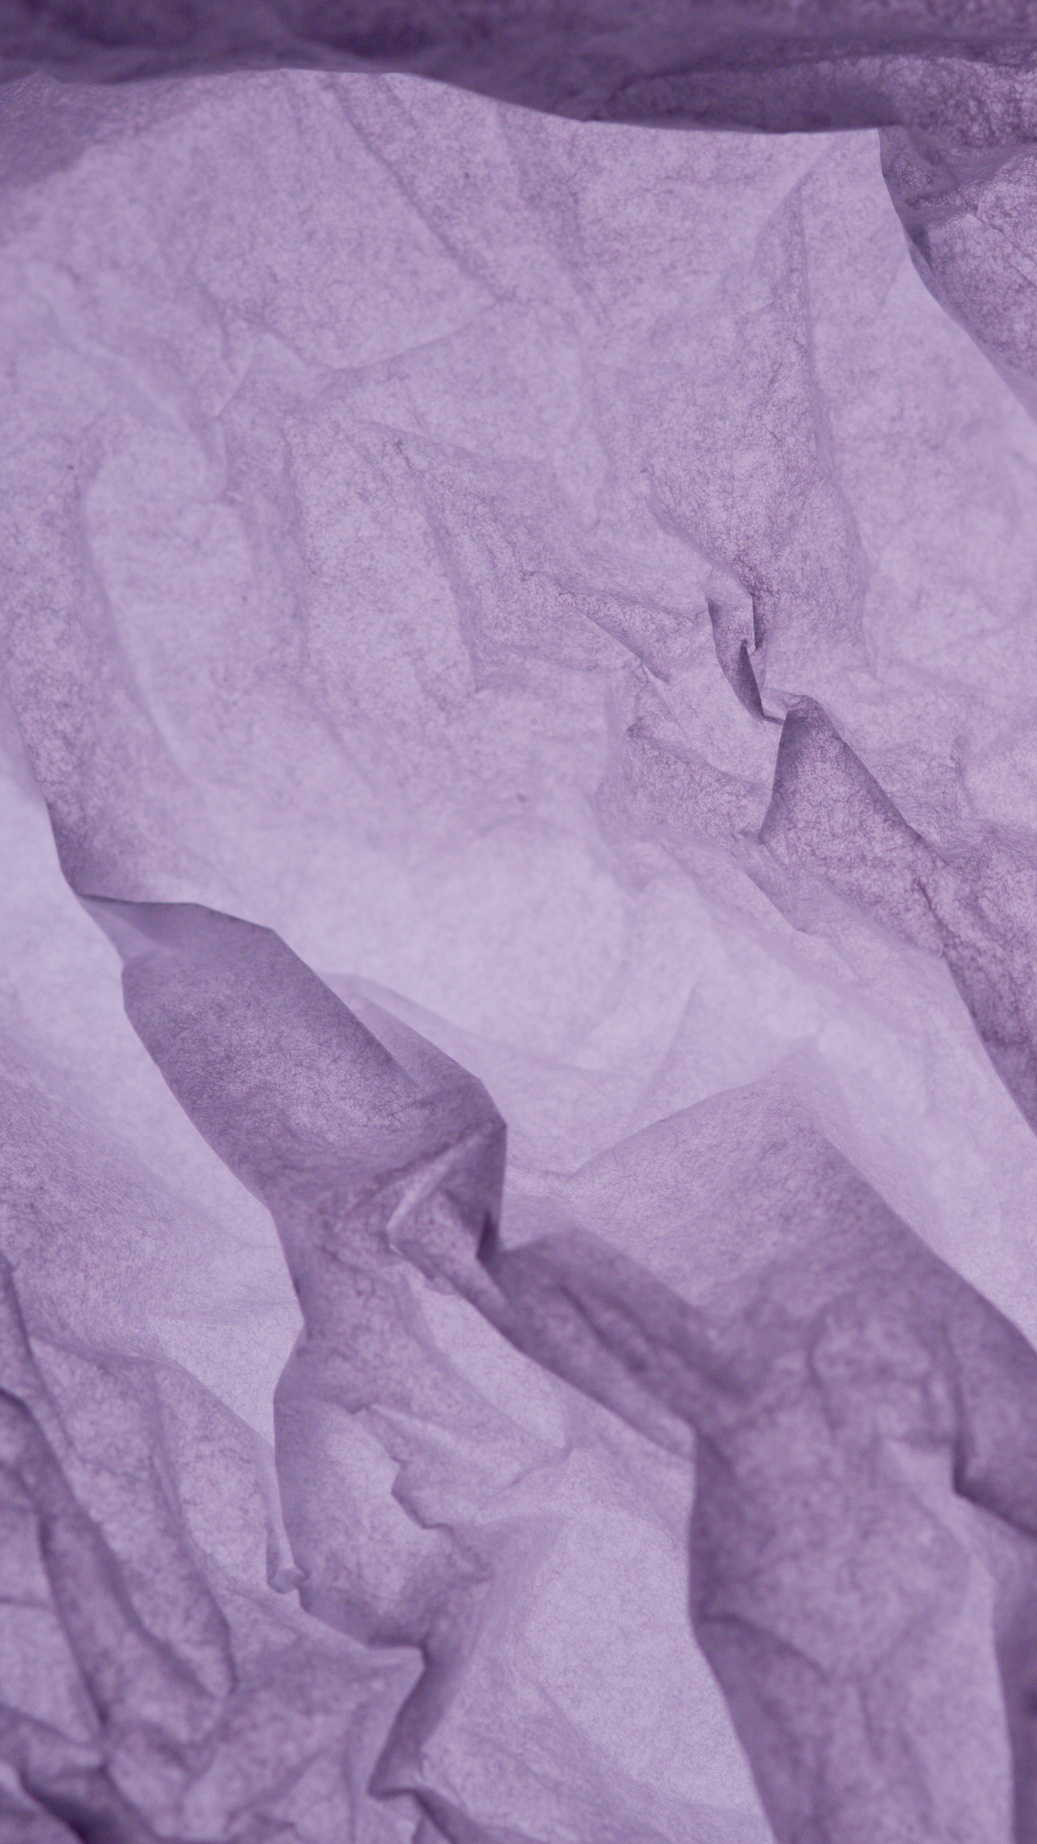 Photograph of Purple Crumpled Paper